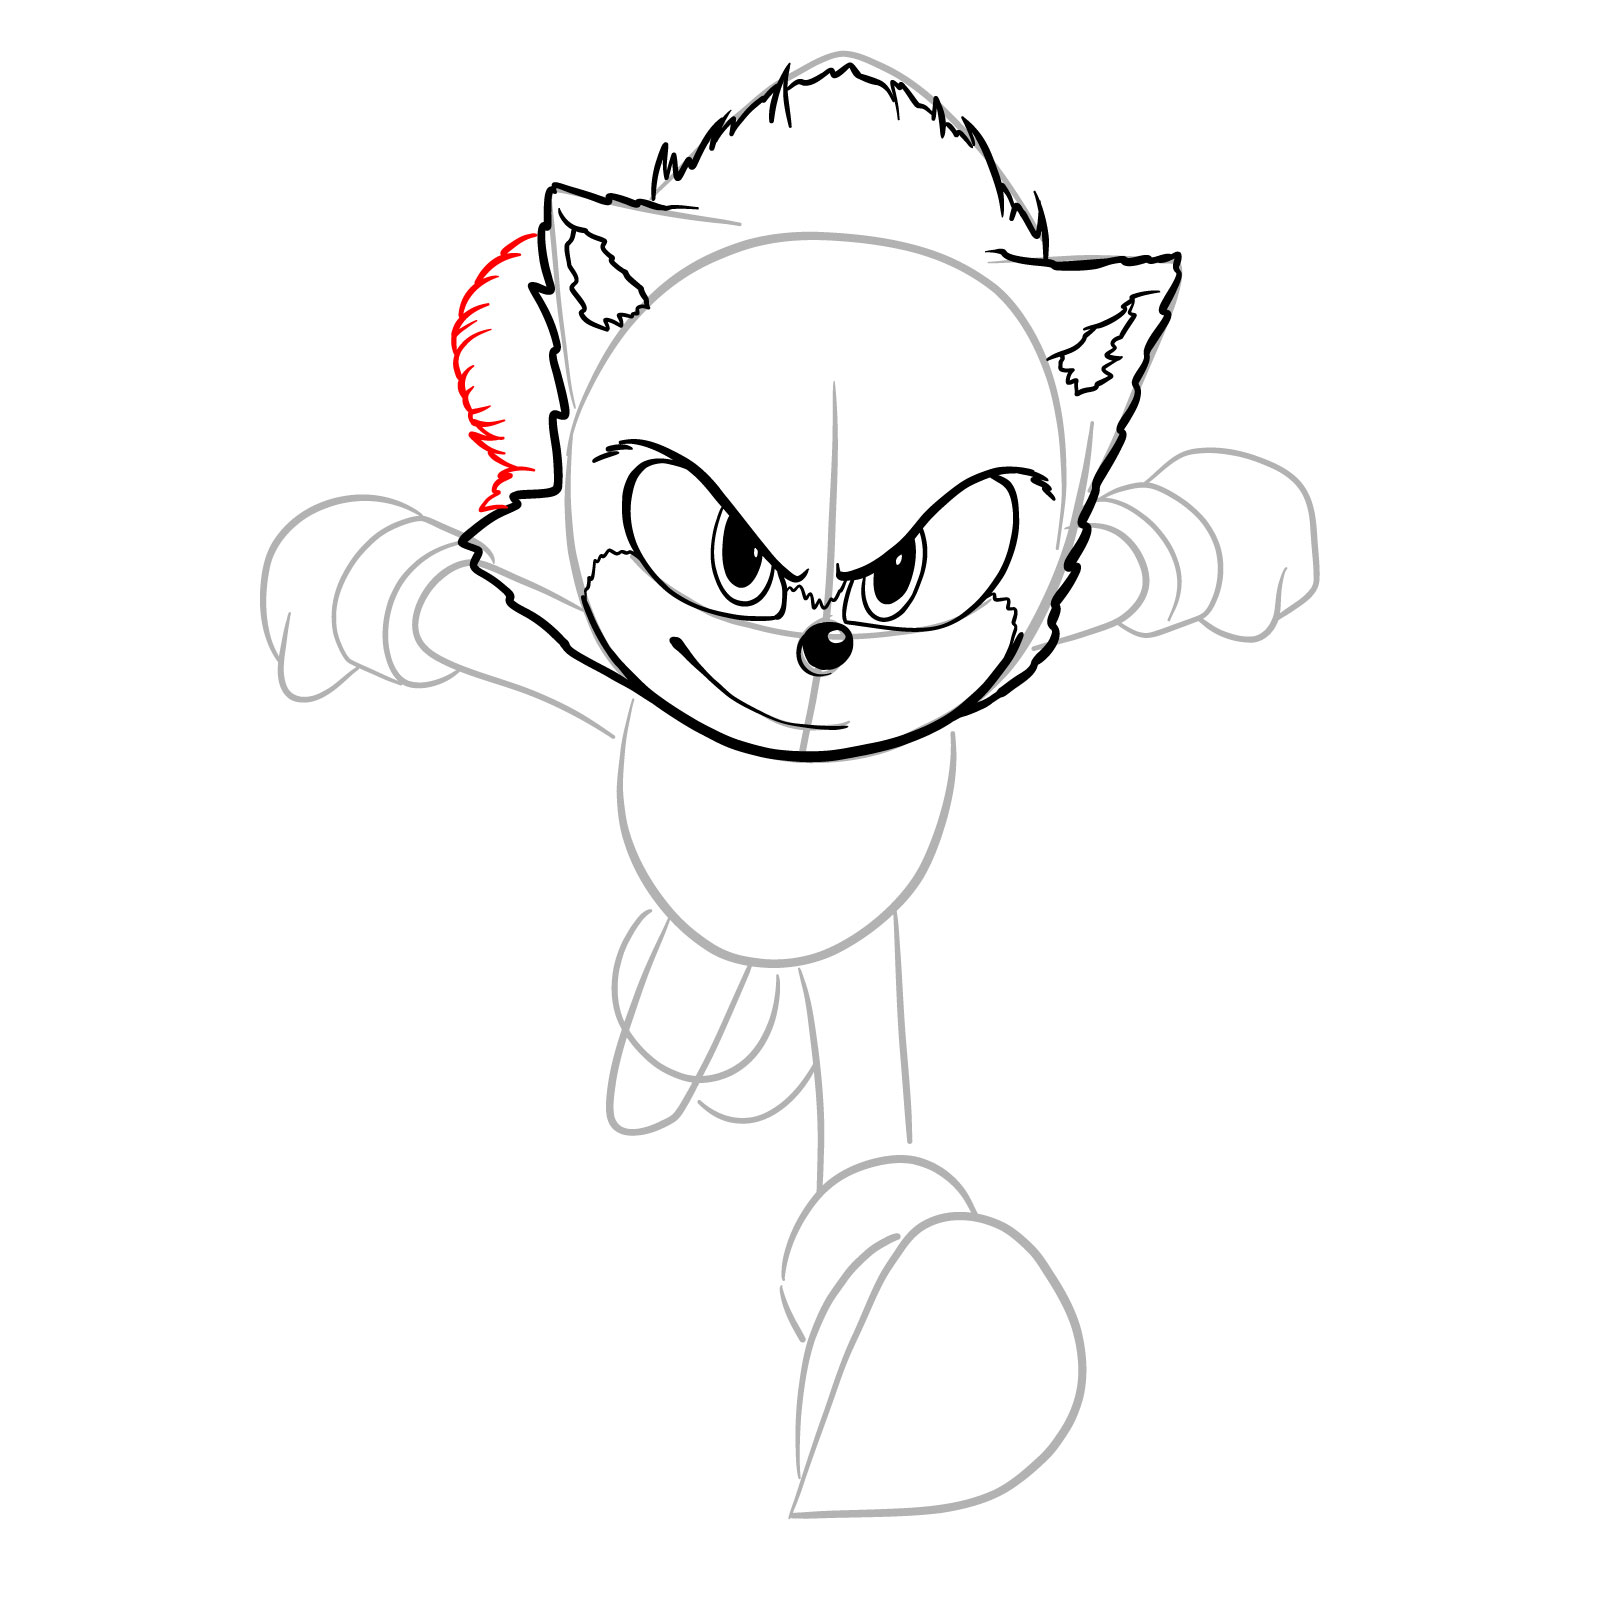 How to draw Sonic from the movie - step 14